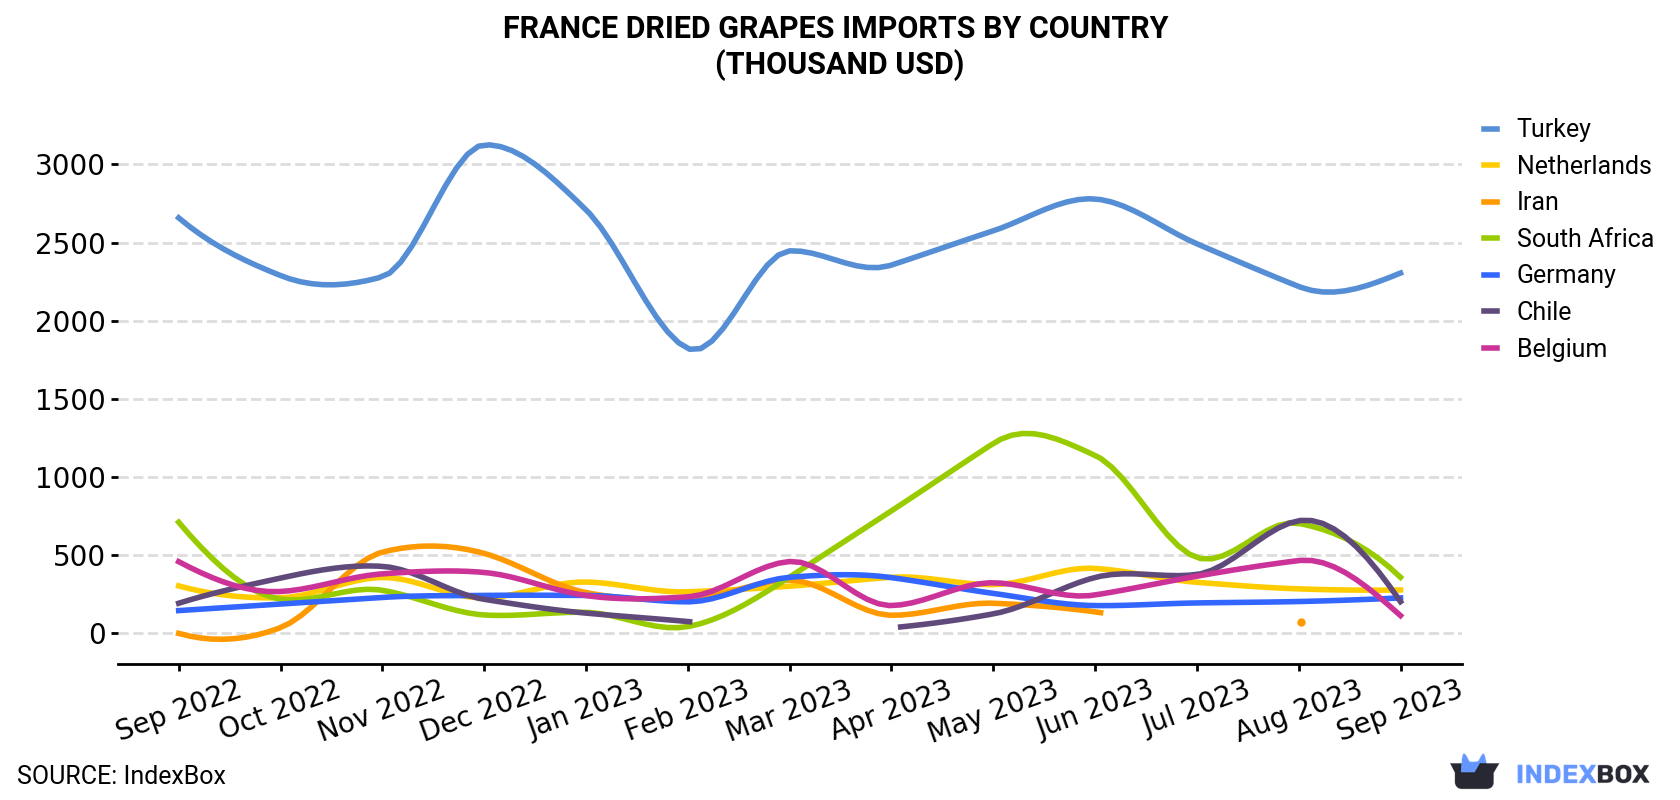 France Dried Grapes Imports By Country (Thousand USD)